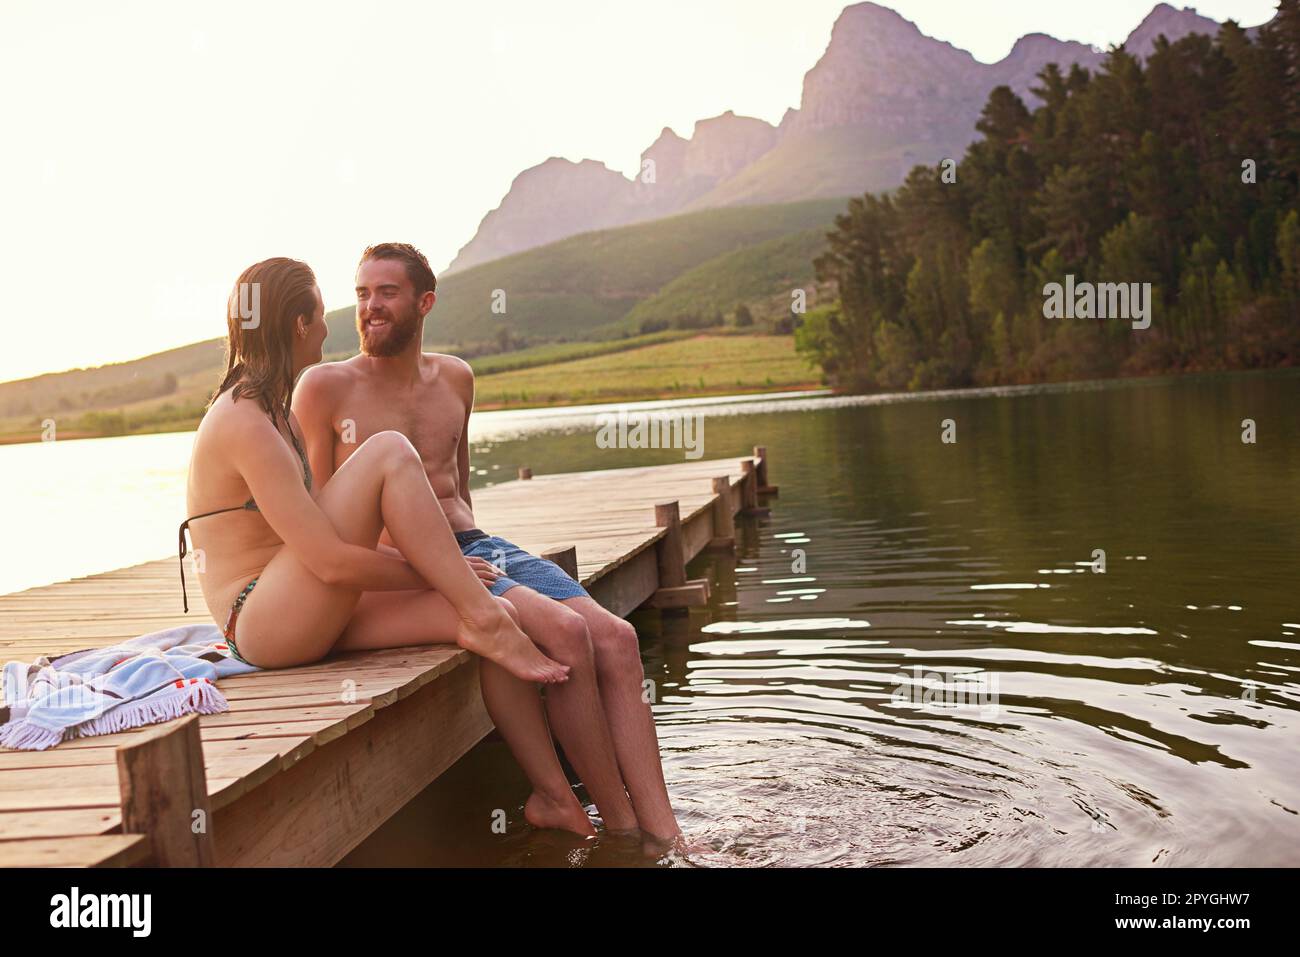 Idyllic summer. an affectionate young couple in swimsuits sitting on a dock at sunset. Stock Photo